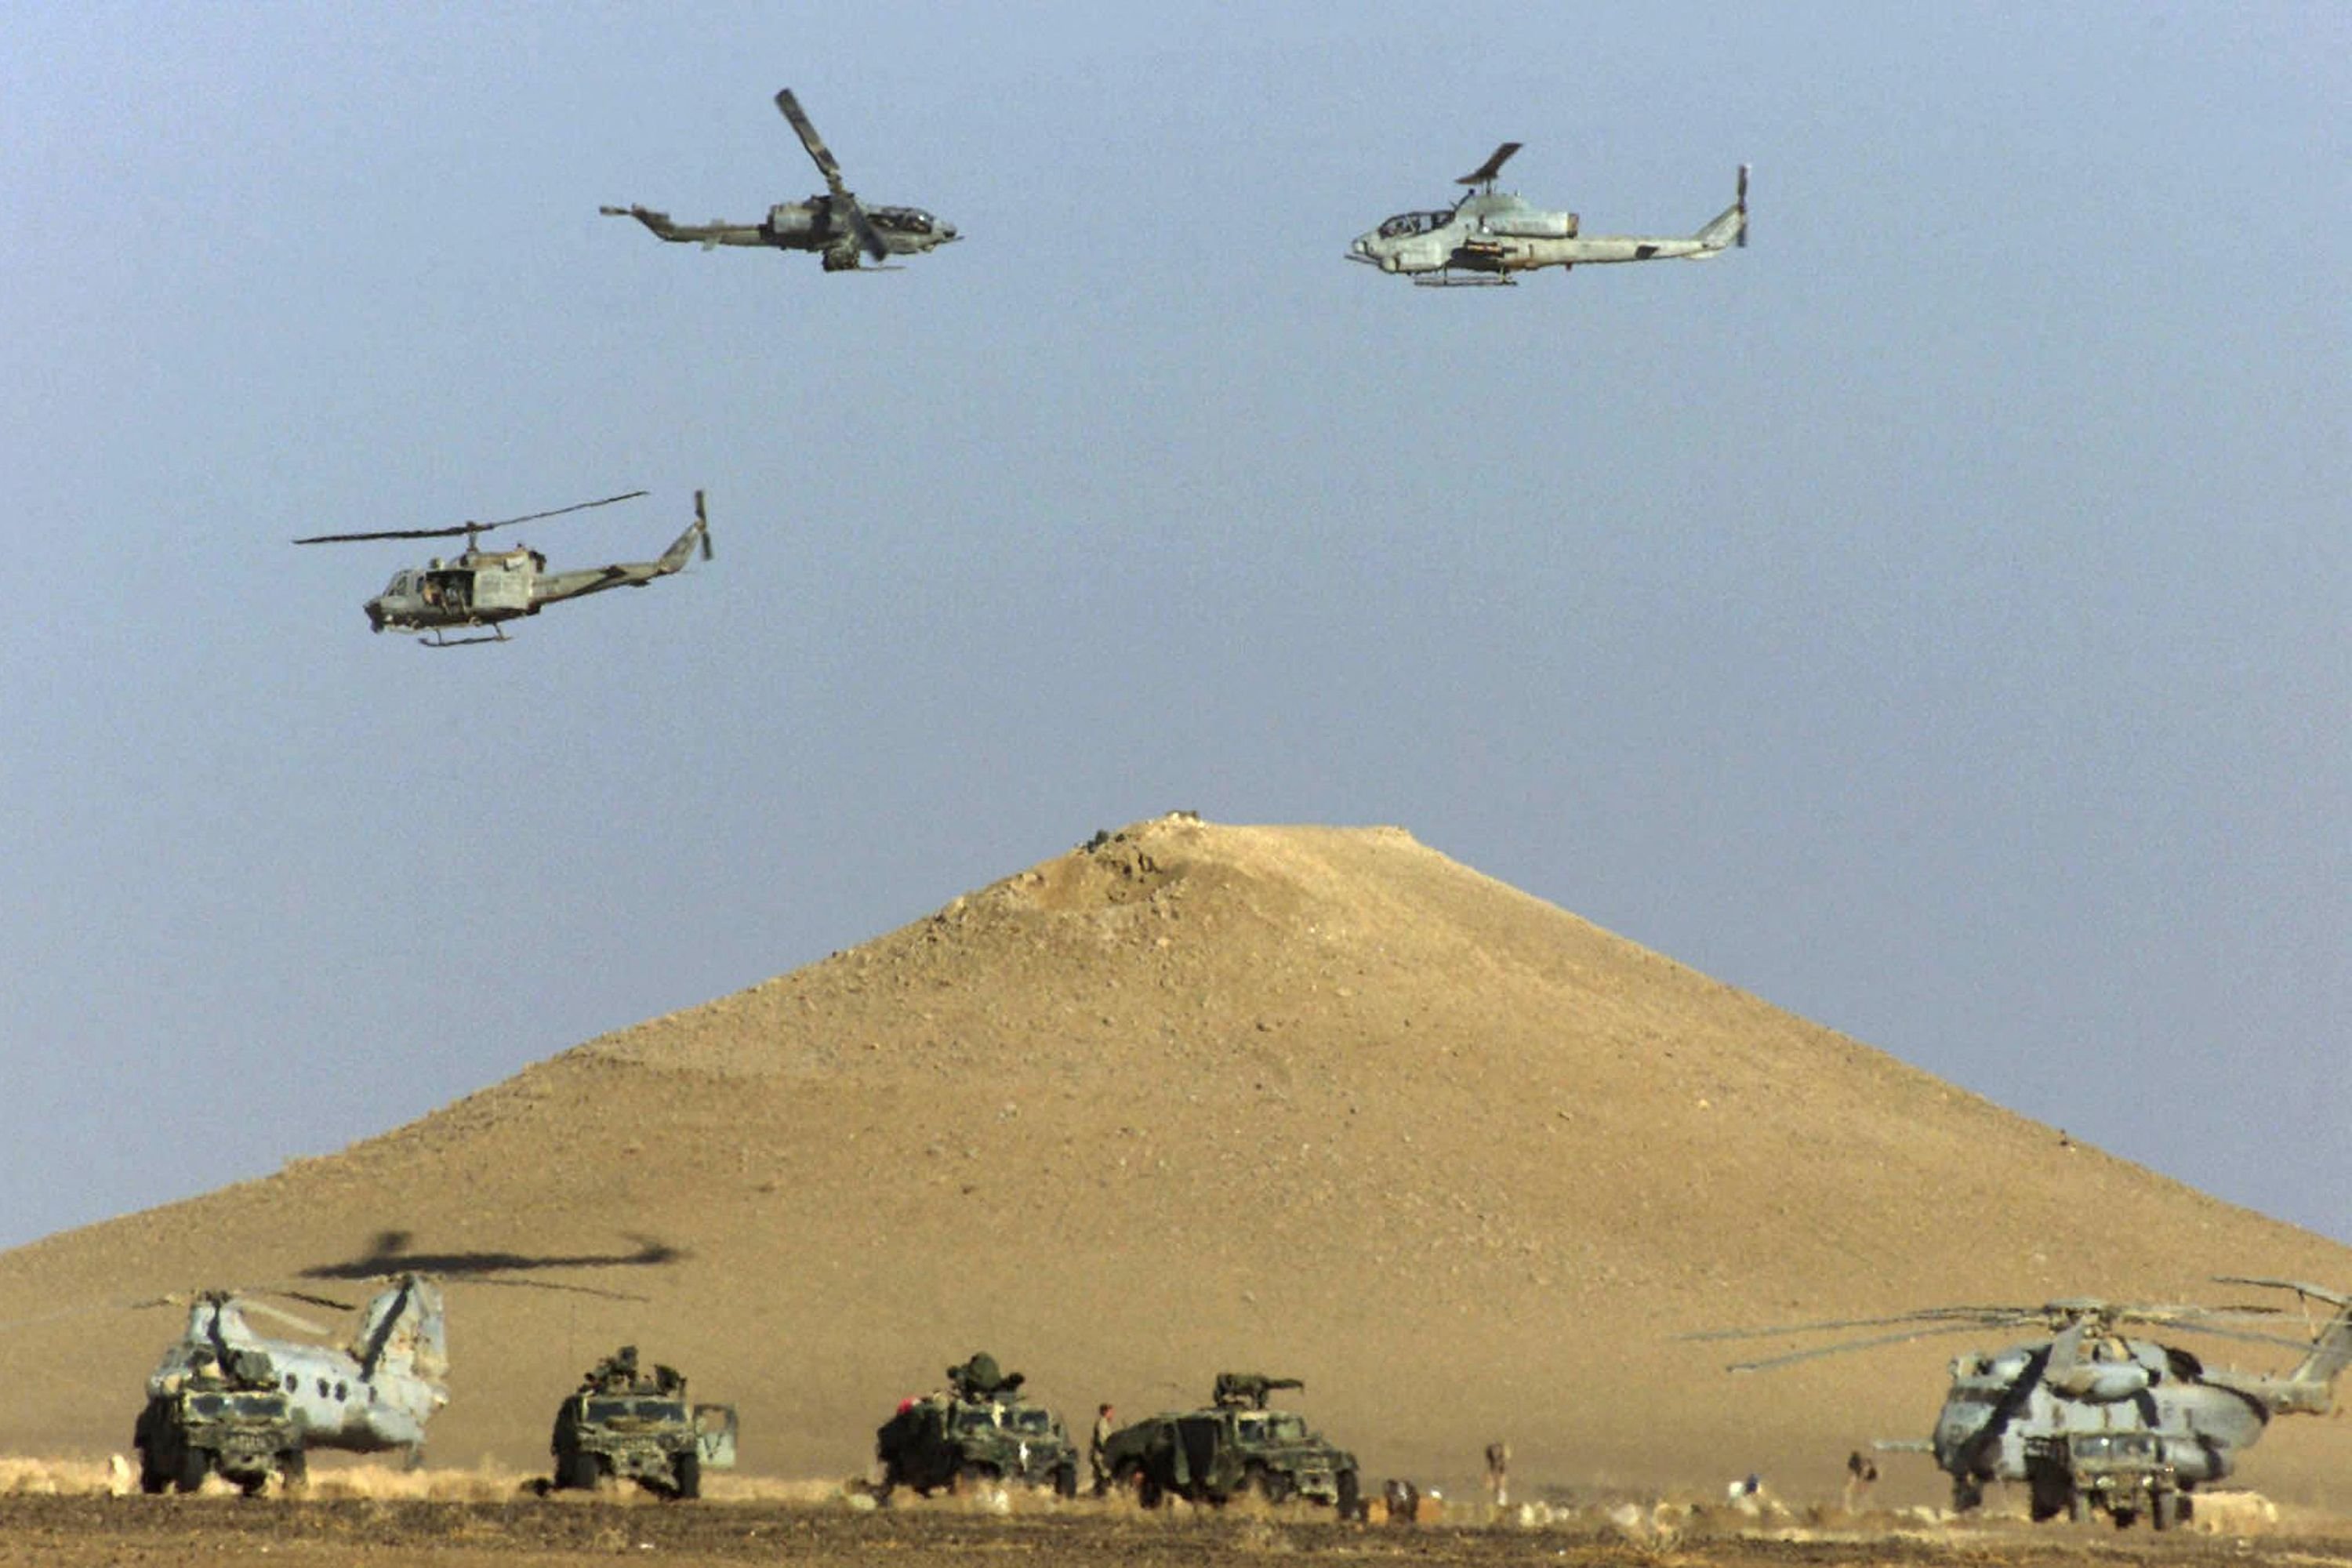 U.S. Marine Cobra attack helicopters circling above larger CH-53 helicopters at the U.S. Marines operations base in southern Afghanistan before heading out north on a mission, Dec. 4, 2001. (AFP Photo)